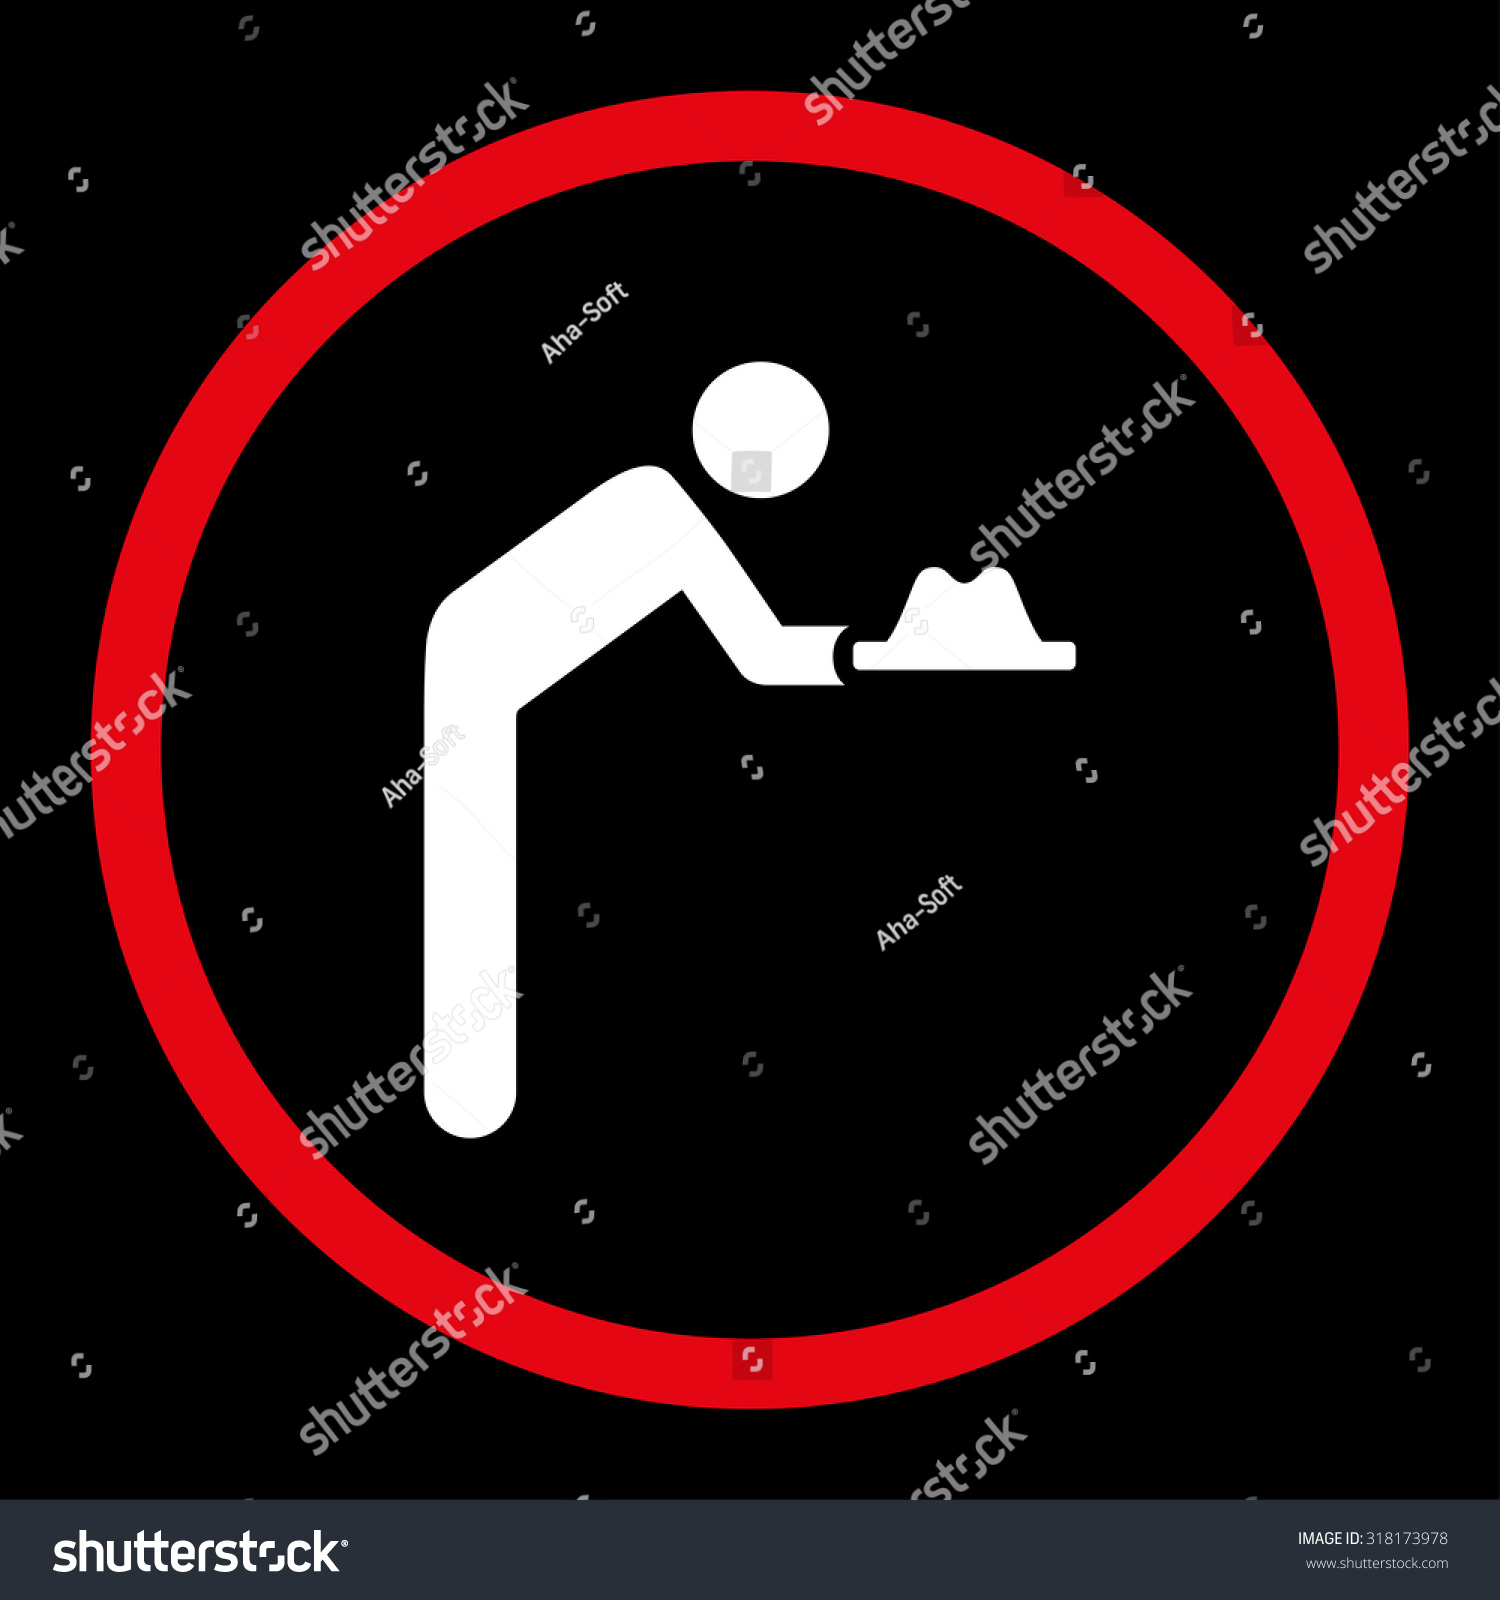 Servant Vector Icon This Rounded Flat Stock Vector Royalty Free 318173978 Shutterstock 1109